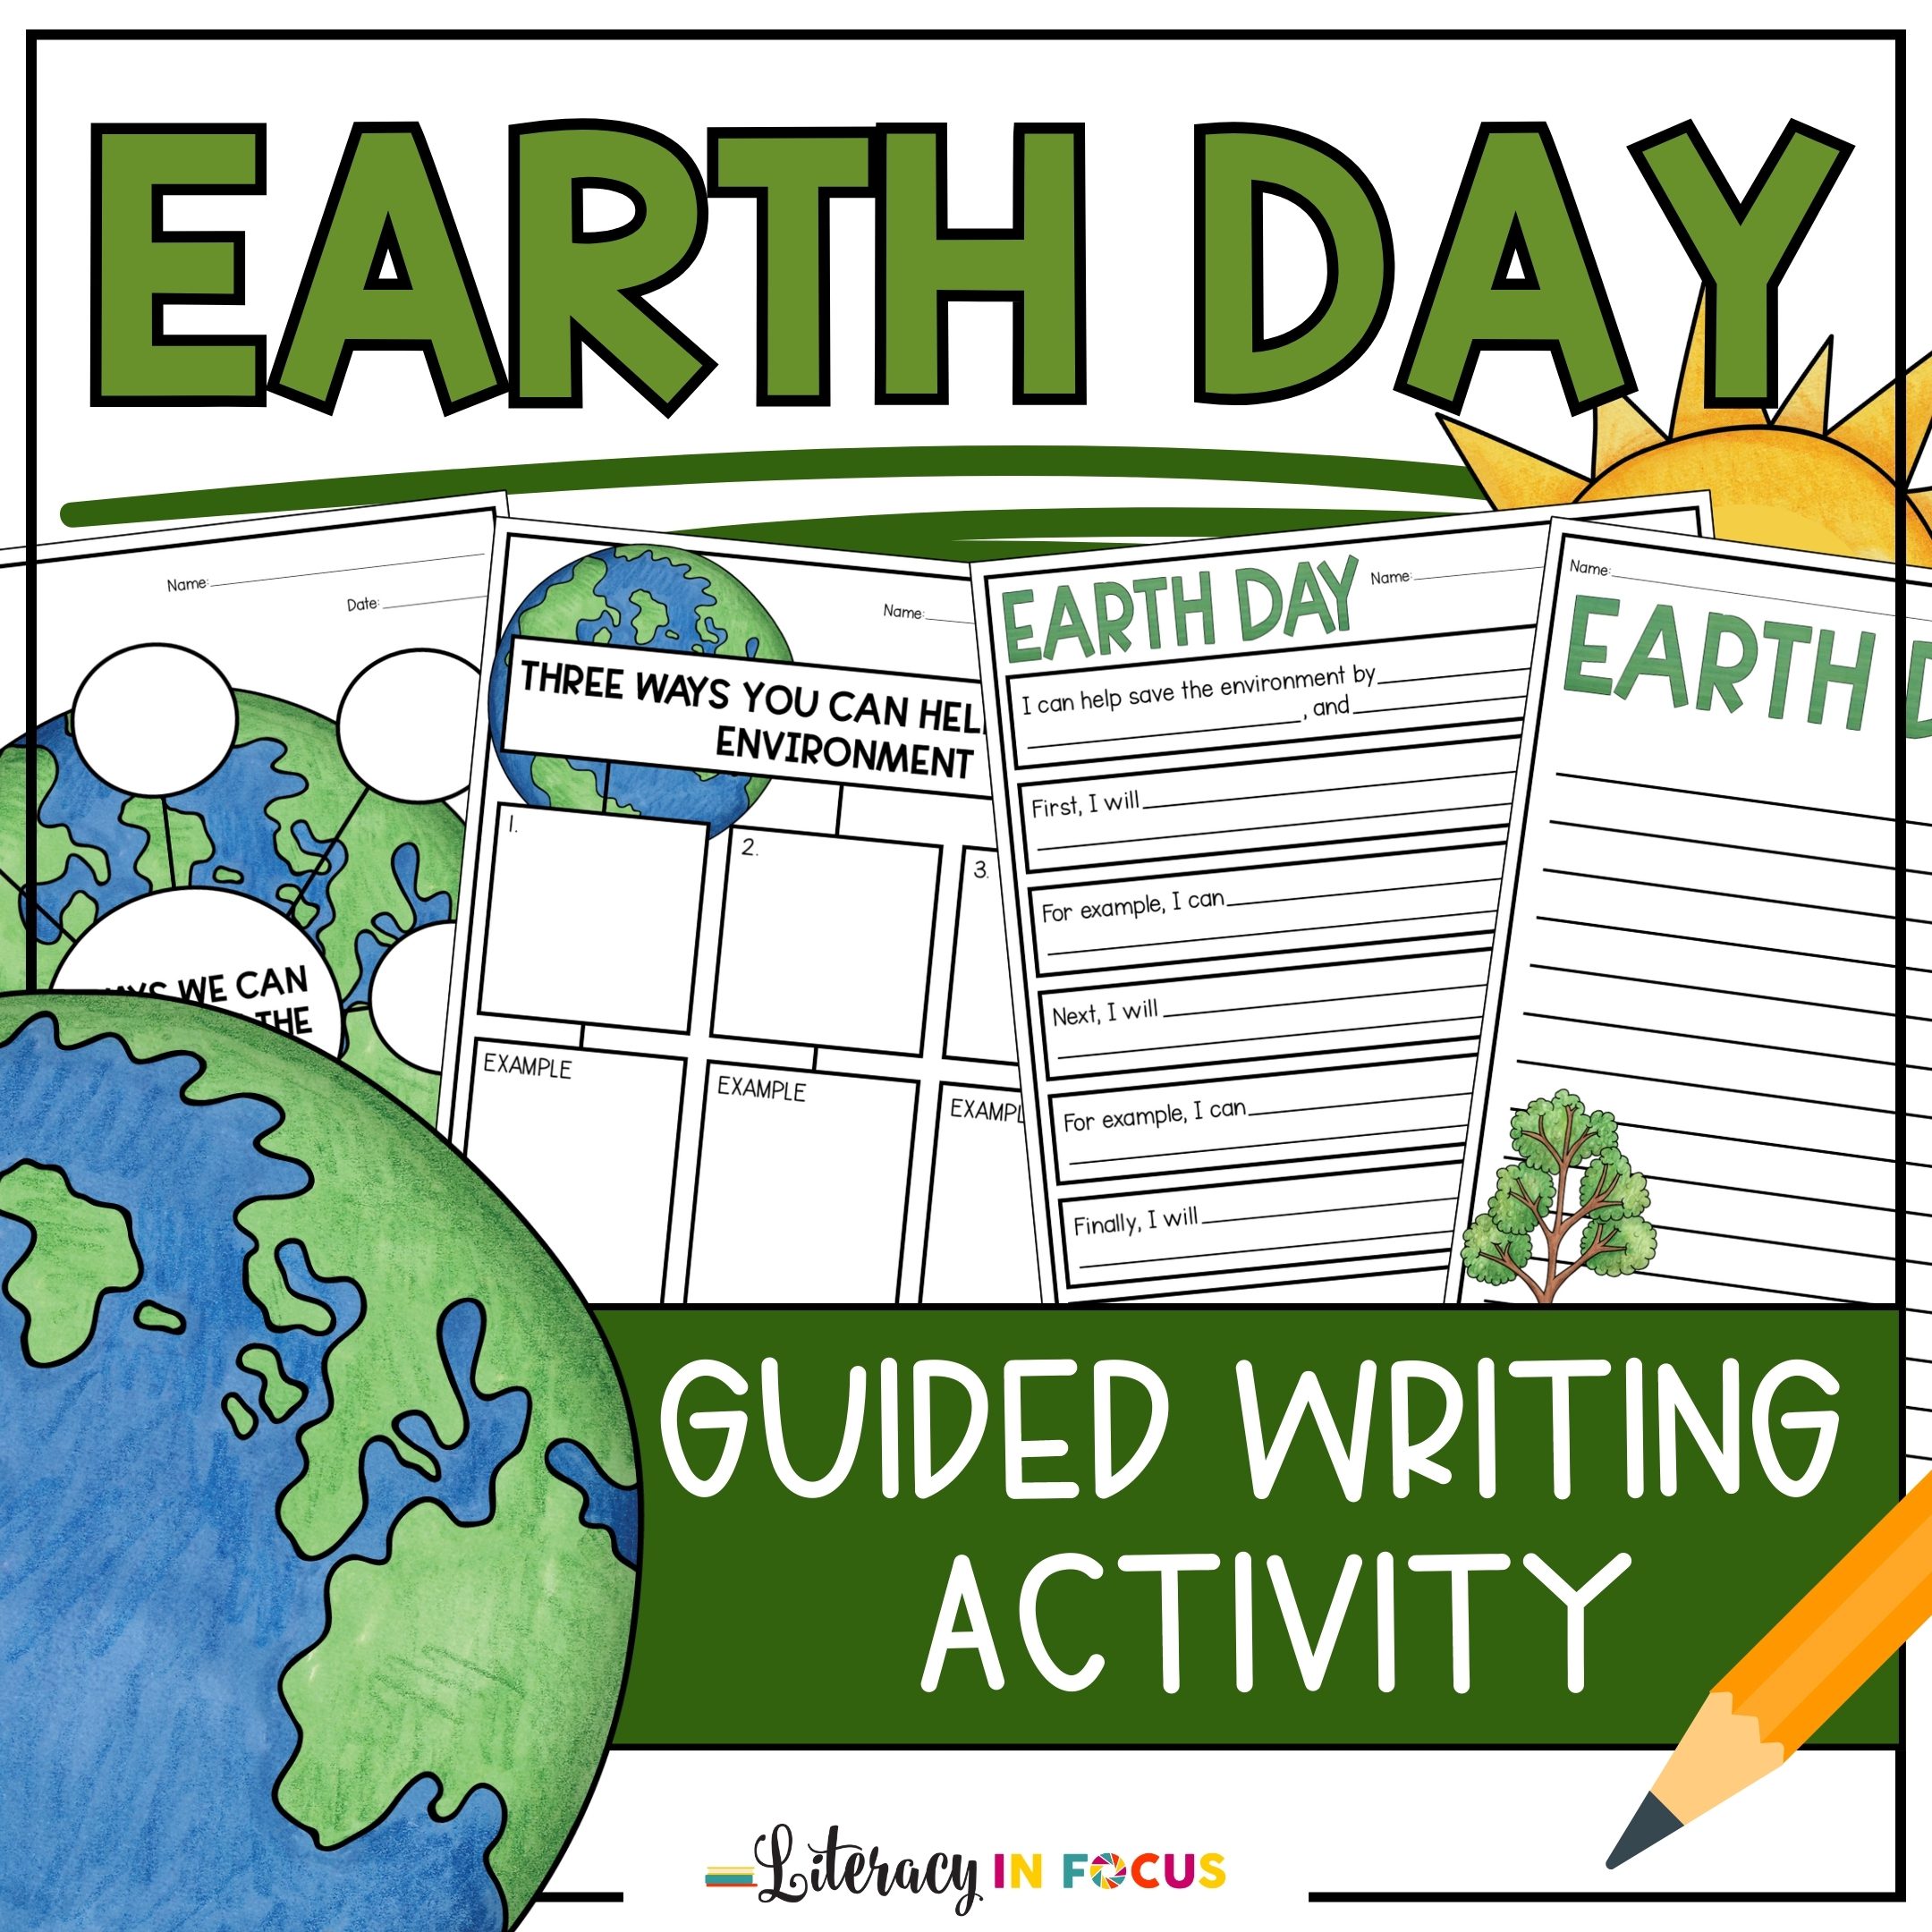 Earth Day Writing Activity for Kids